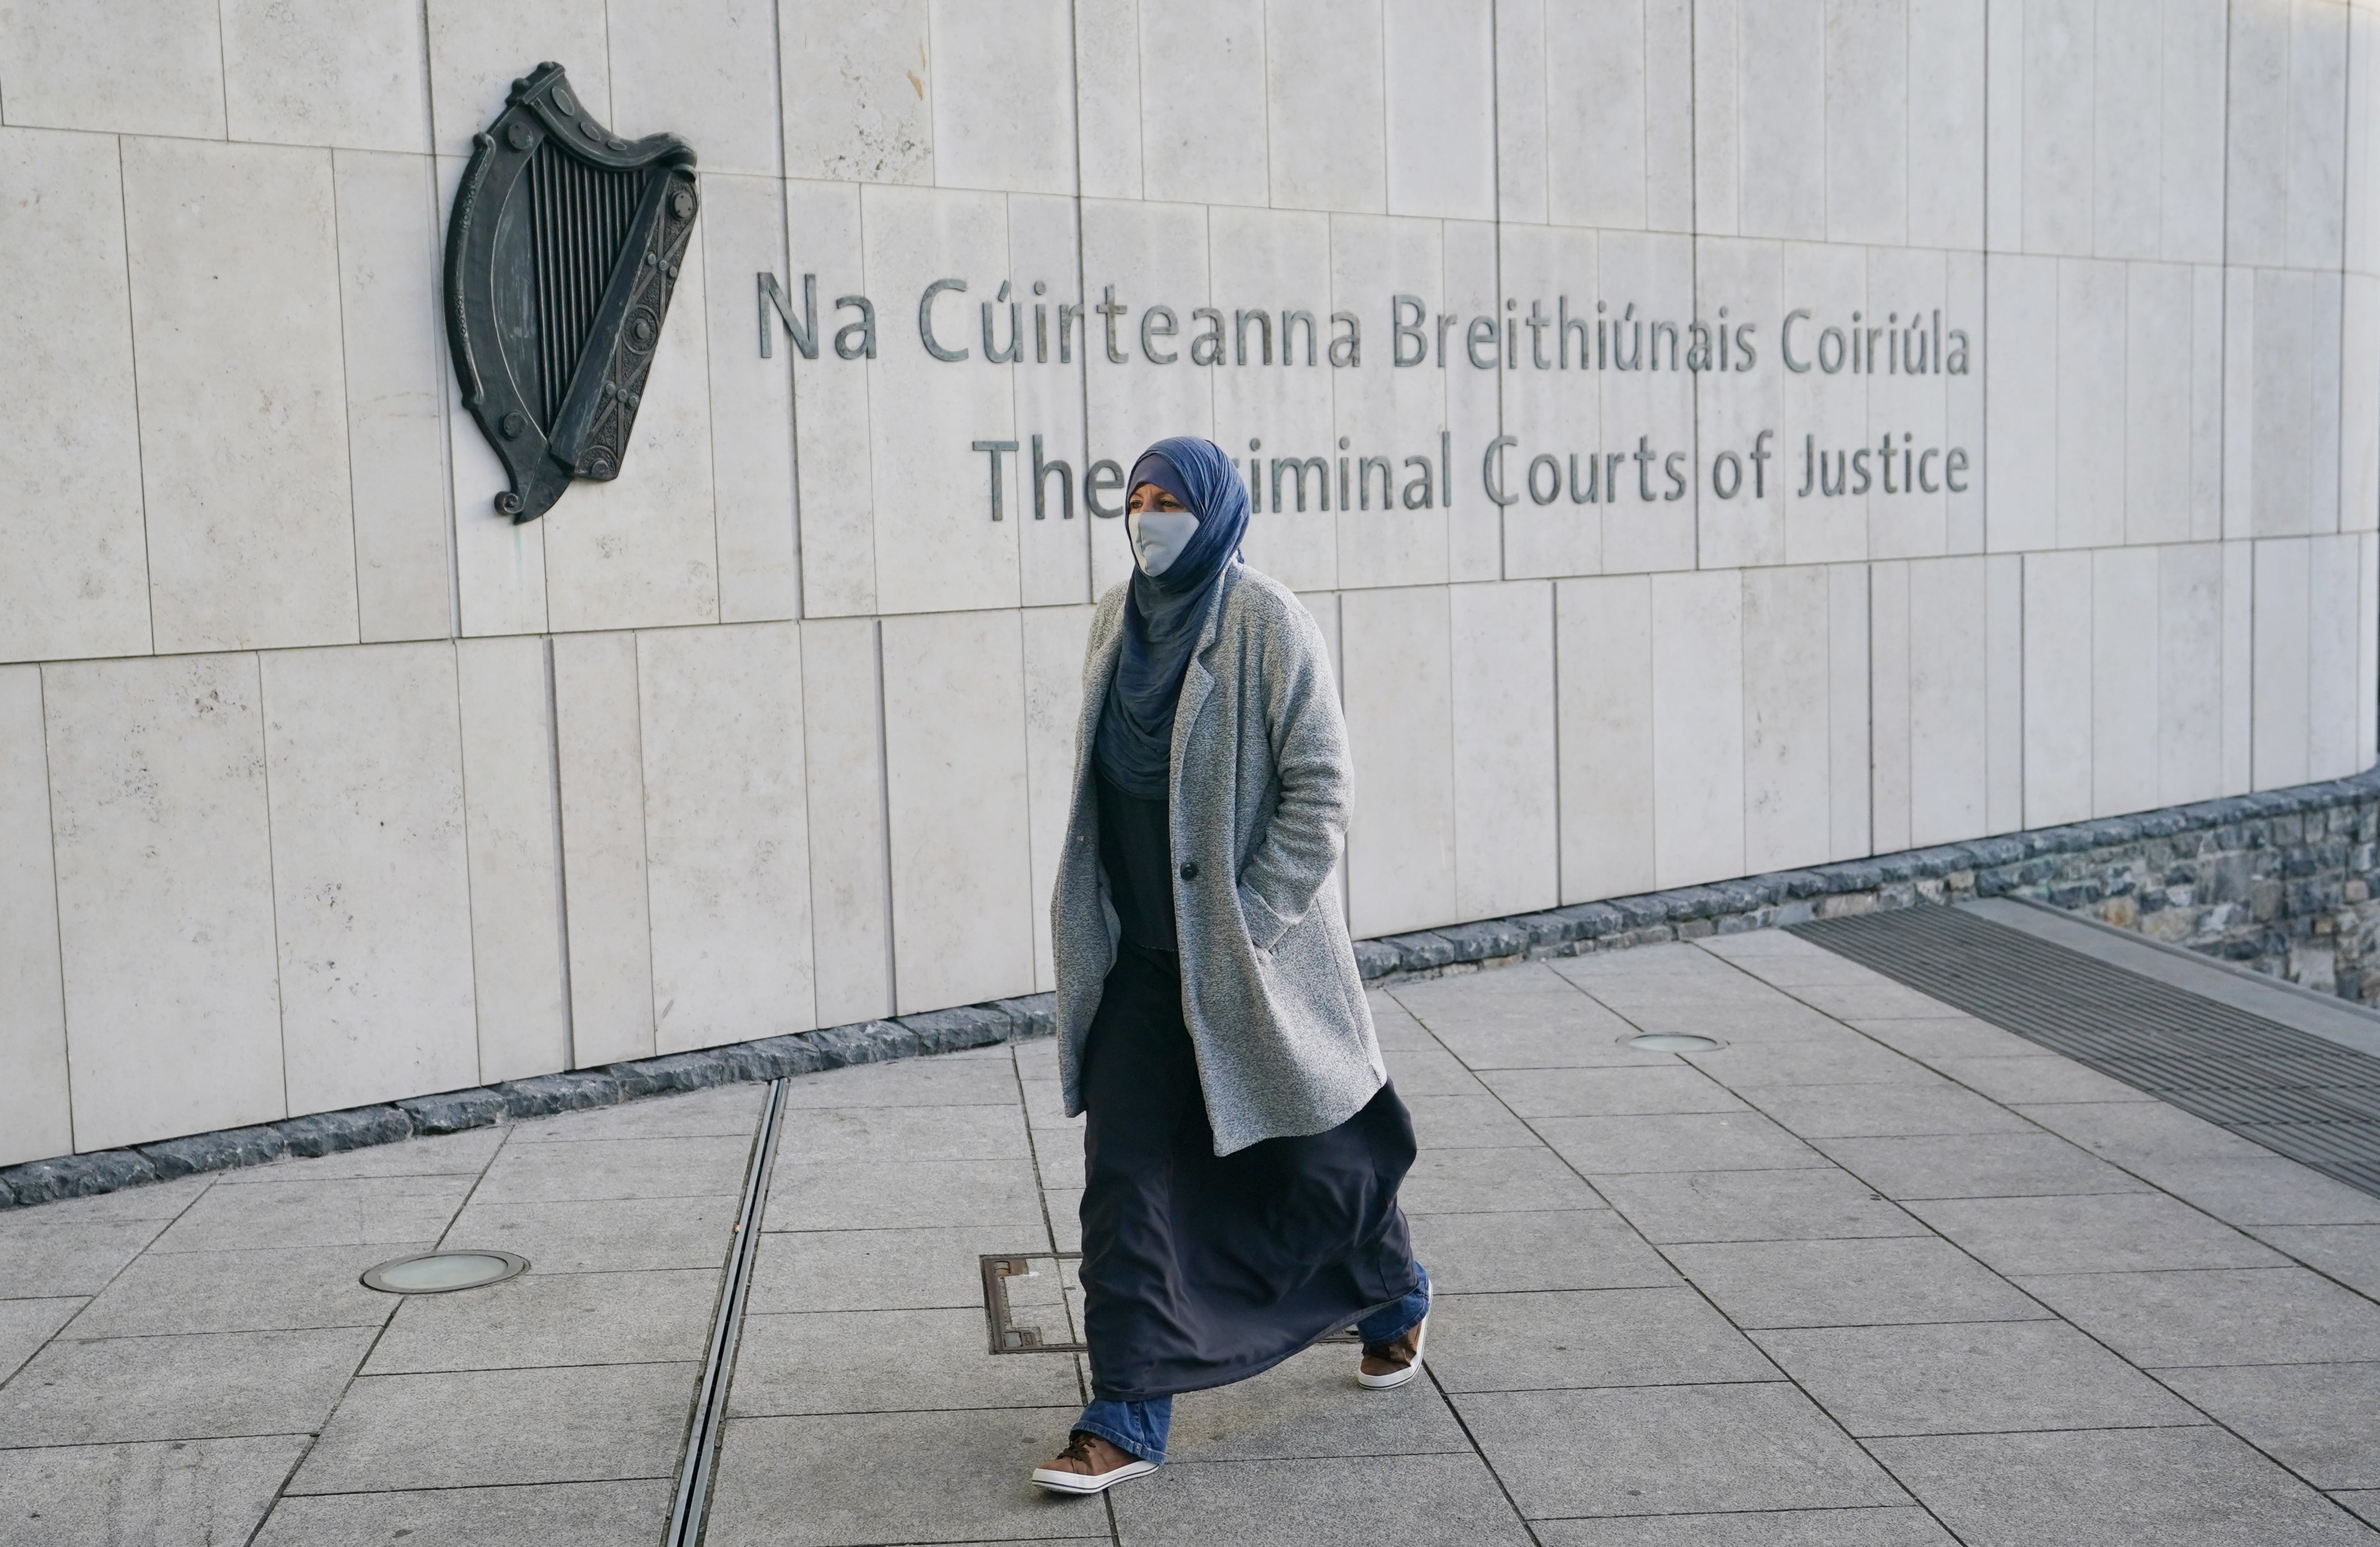 Lisa Smith, accused of terrorism offences, arrives at the Special Criminal Court in Dublin. (Niall Carson/PA)